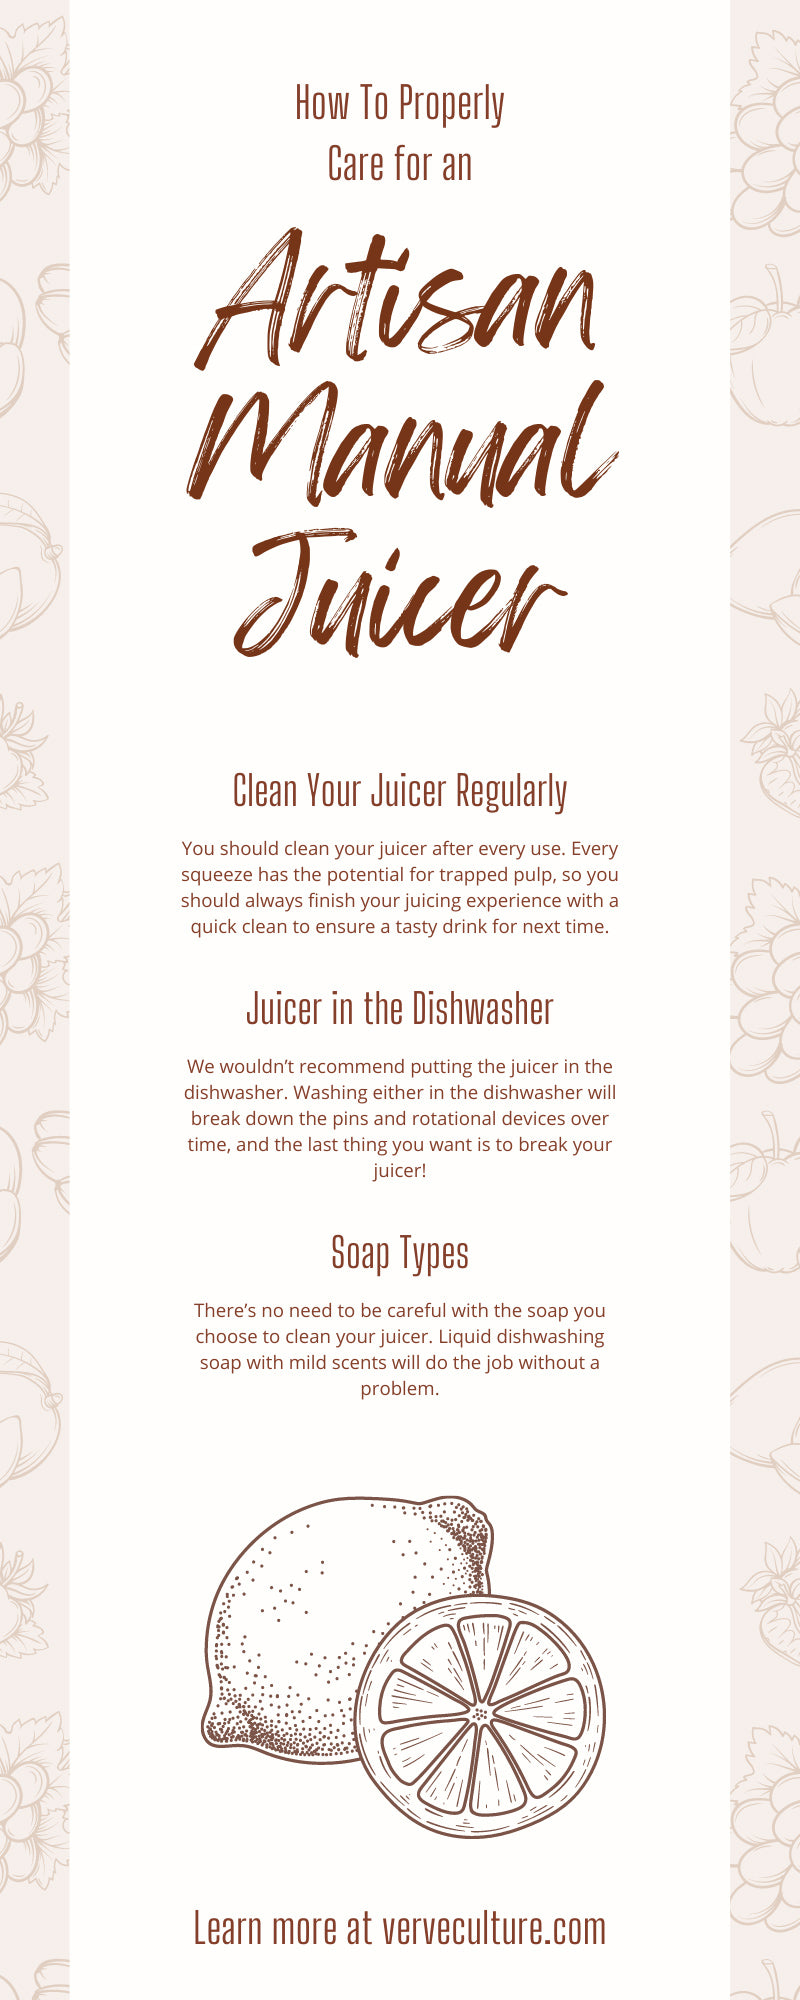 How To Properly Care for an Artisan Manual Juicer